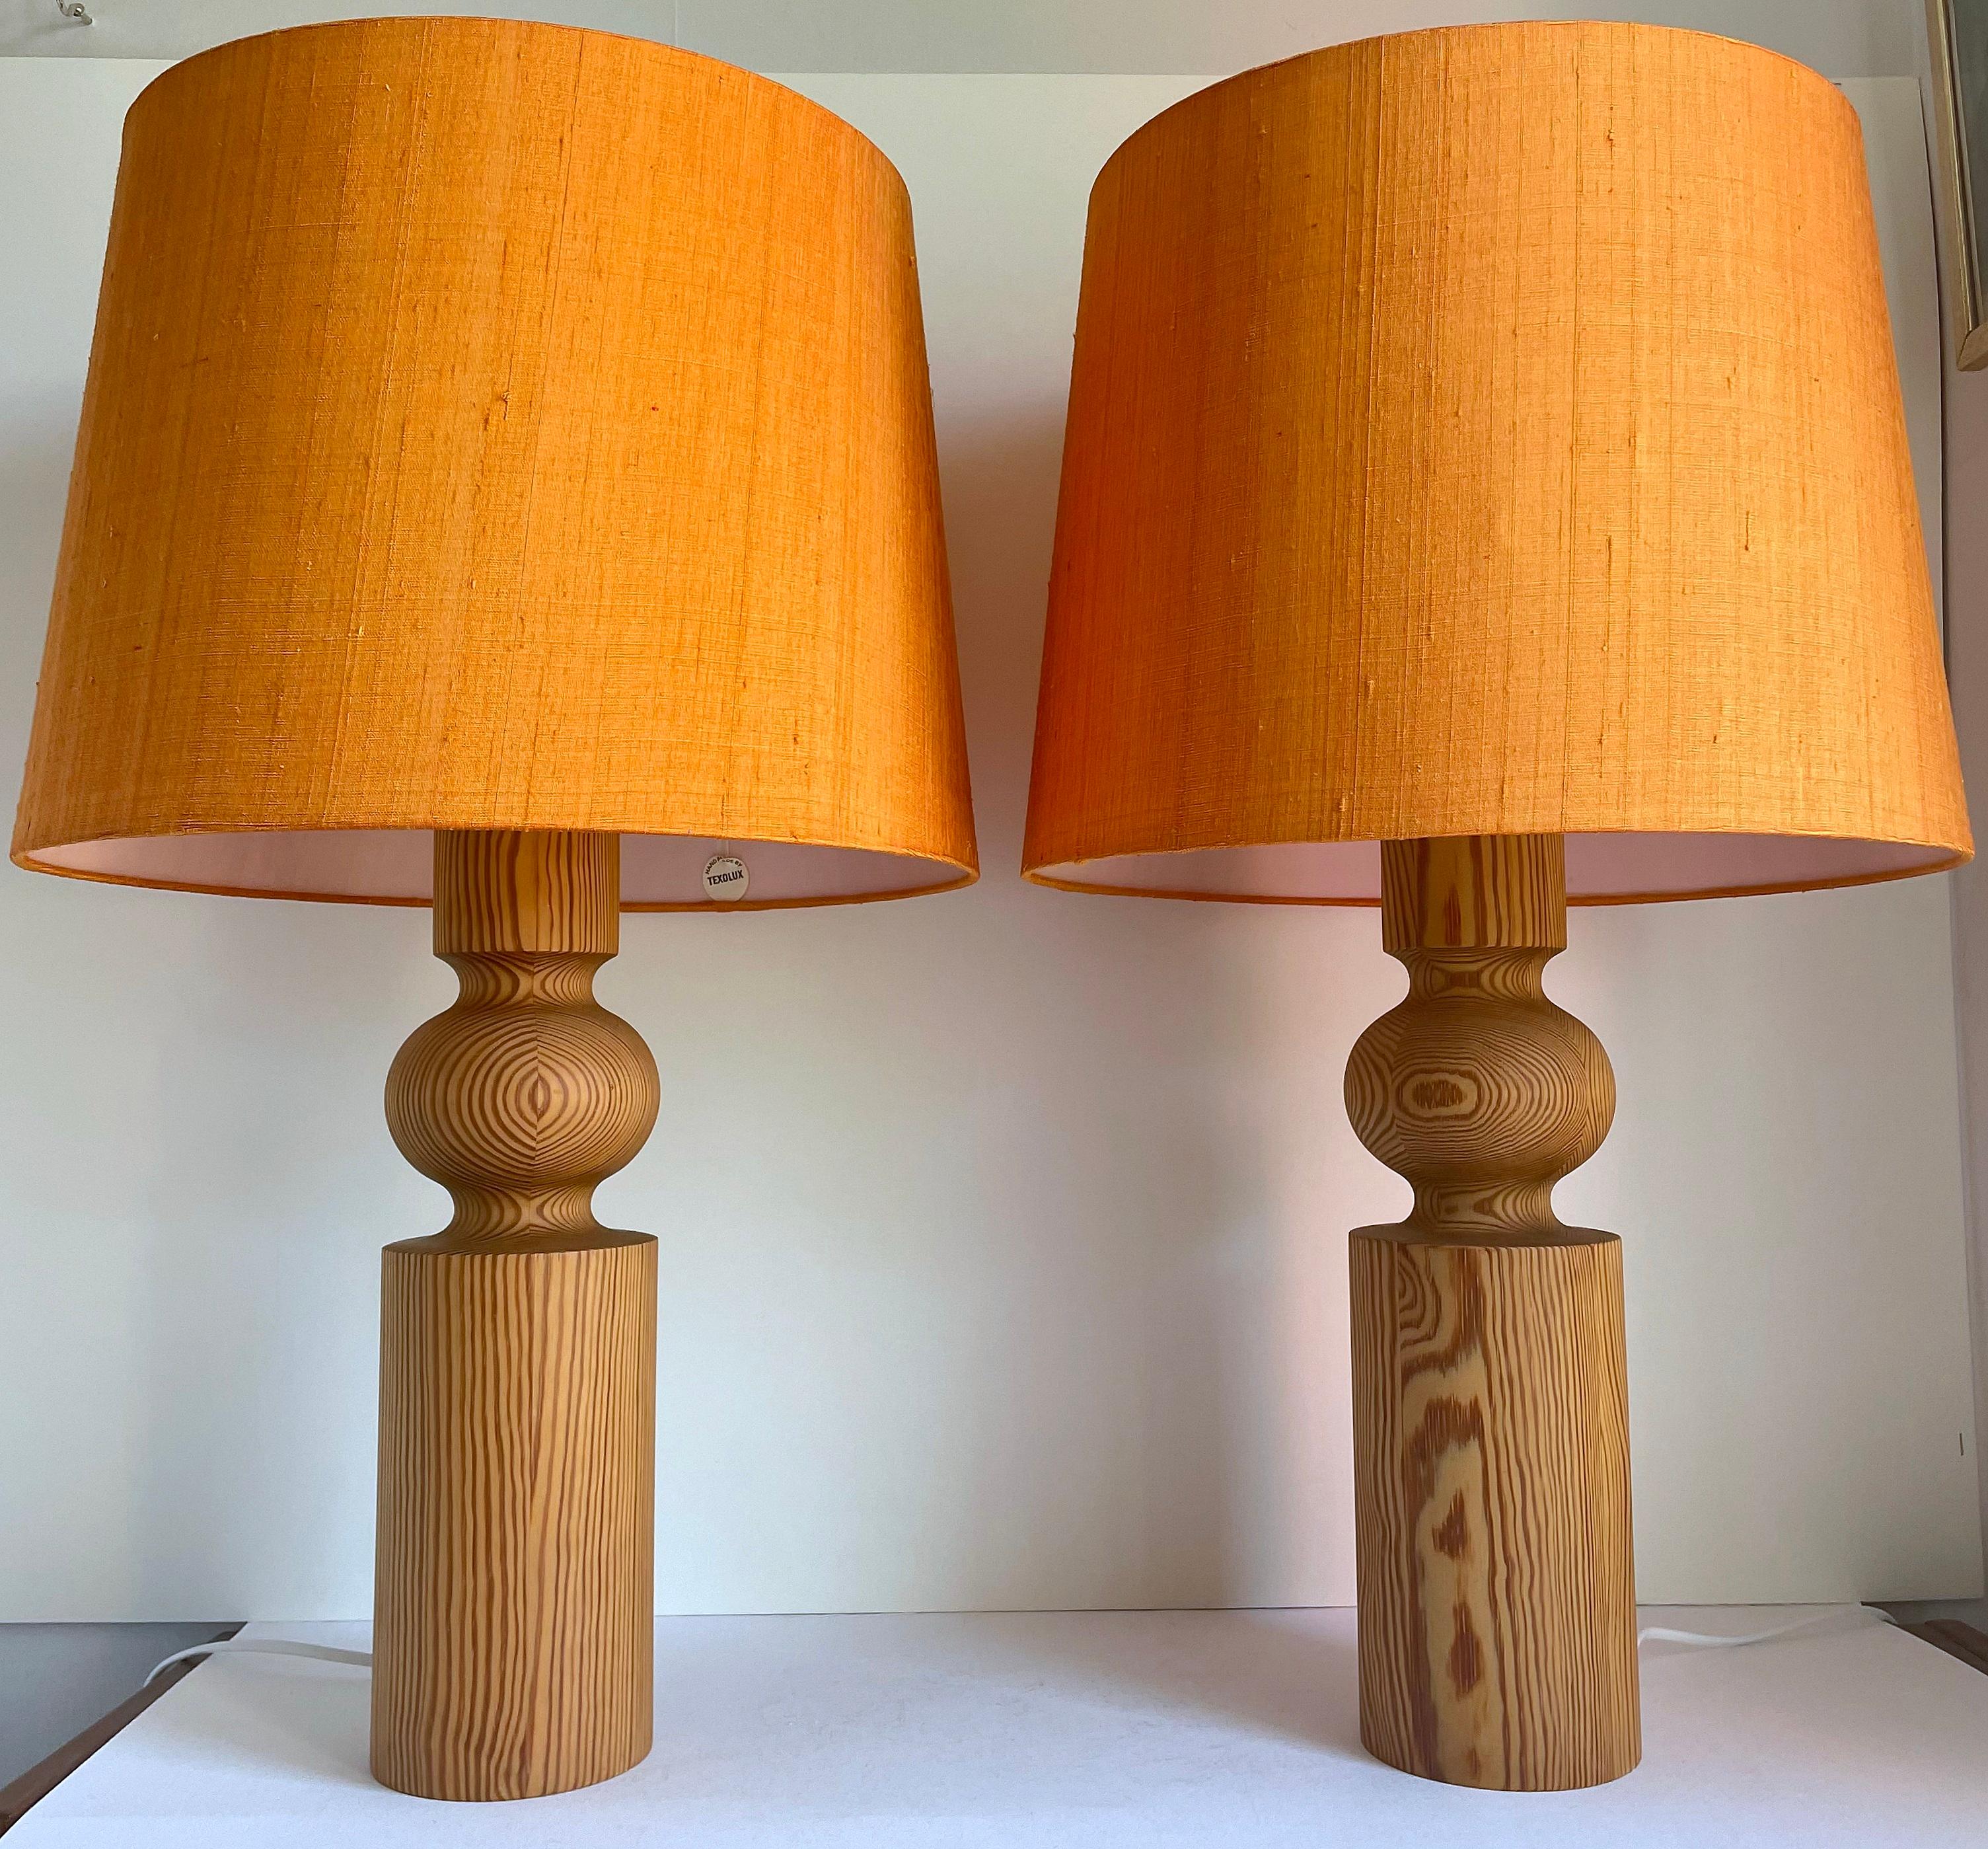 A pair of large, sculptural, solid pine table lamps designed by Uno Kristiansson around 1966 and made by Luxus. The  body of the design is turned pine wood. White acrylic diffusers sit atop the lamps and original Texolux orange fabric shades cloche